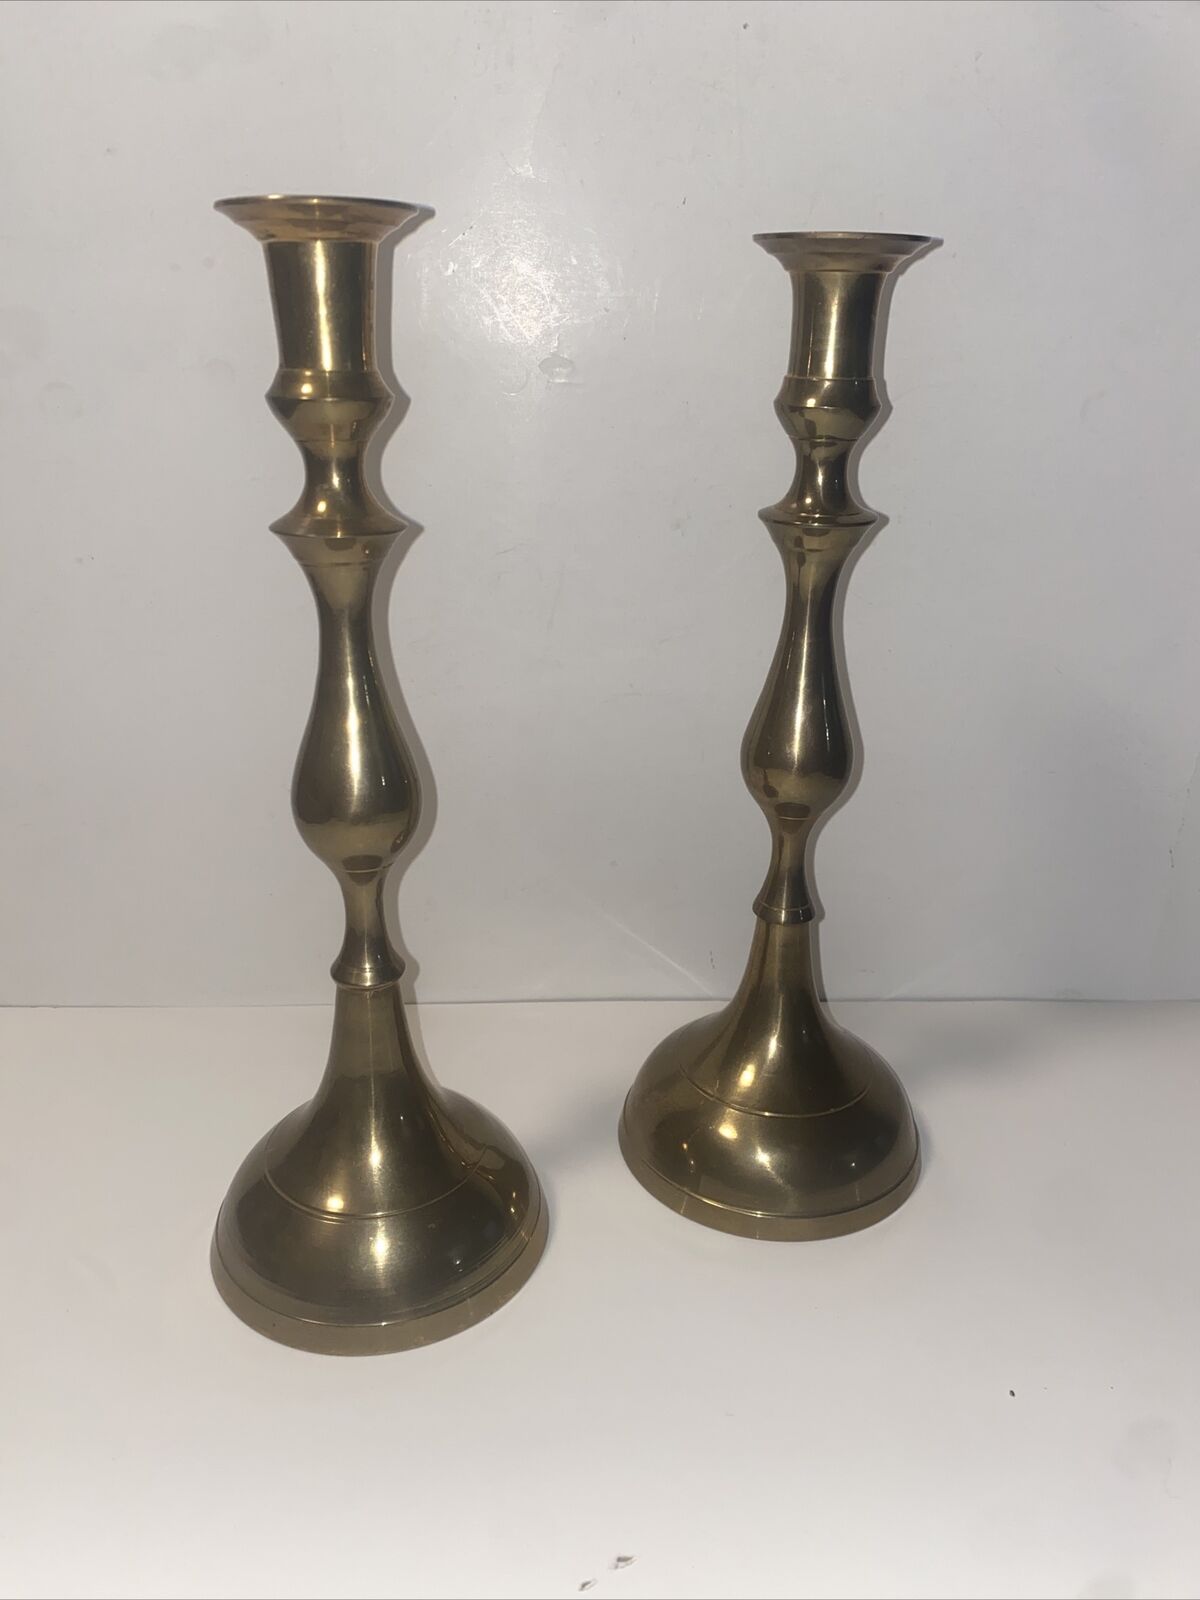 Vintage Pair of 11” Brass Candlesticks Holders Made in India